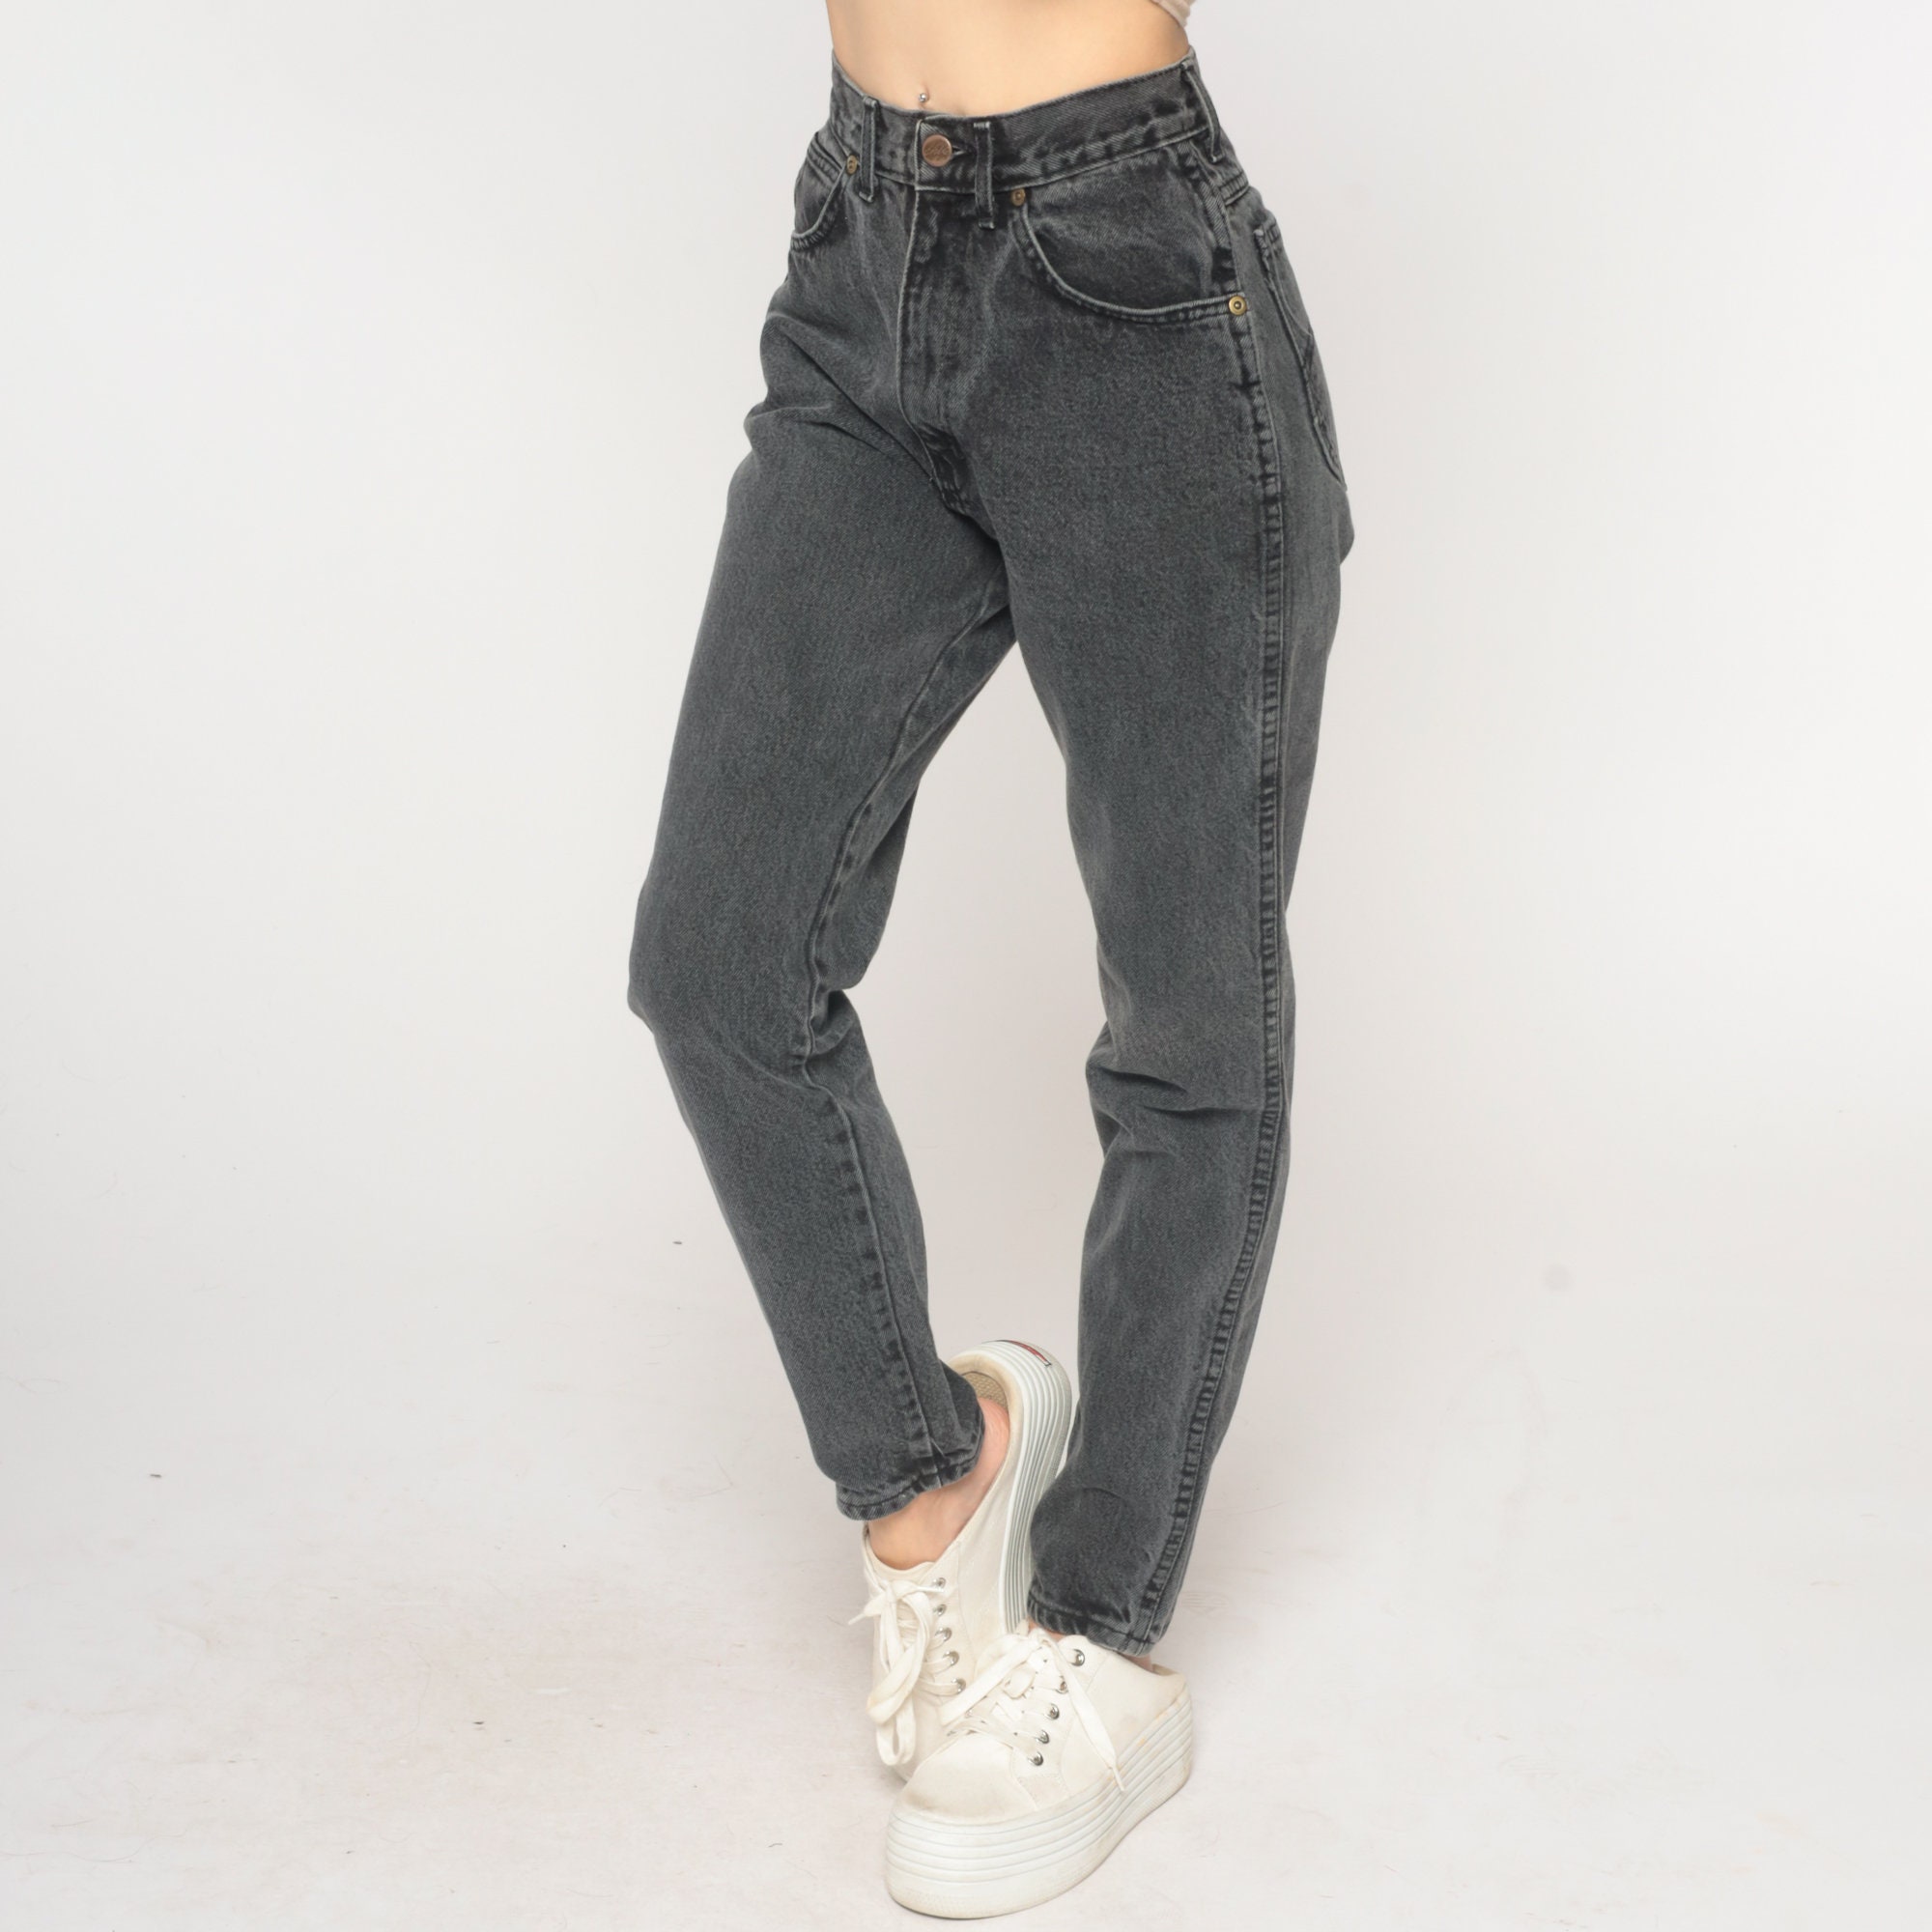 Tapered Black Jeans Vintage Mom Jeans Tapered Jeans 80s Chic Jeans High ...